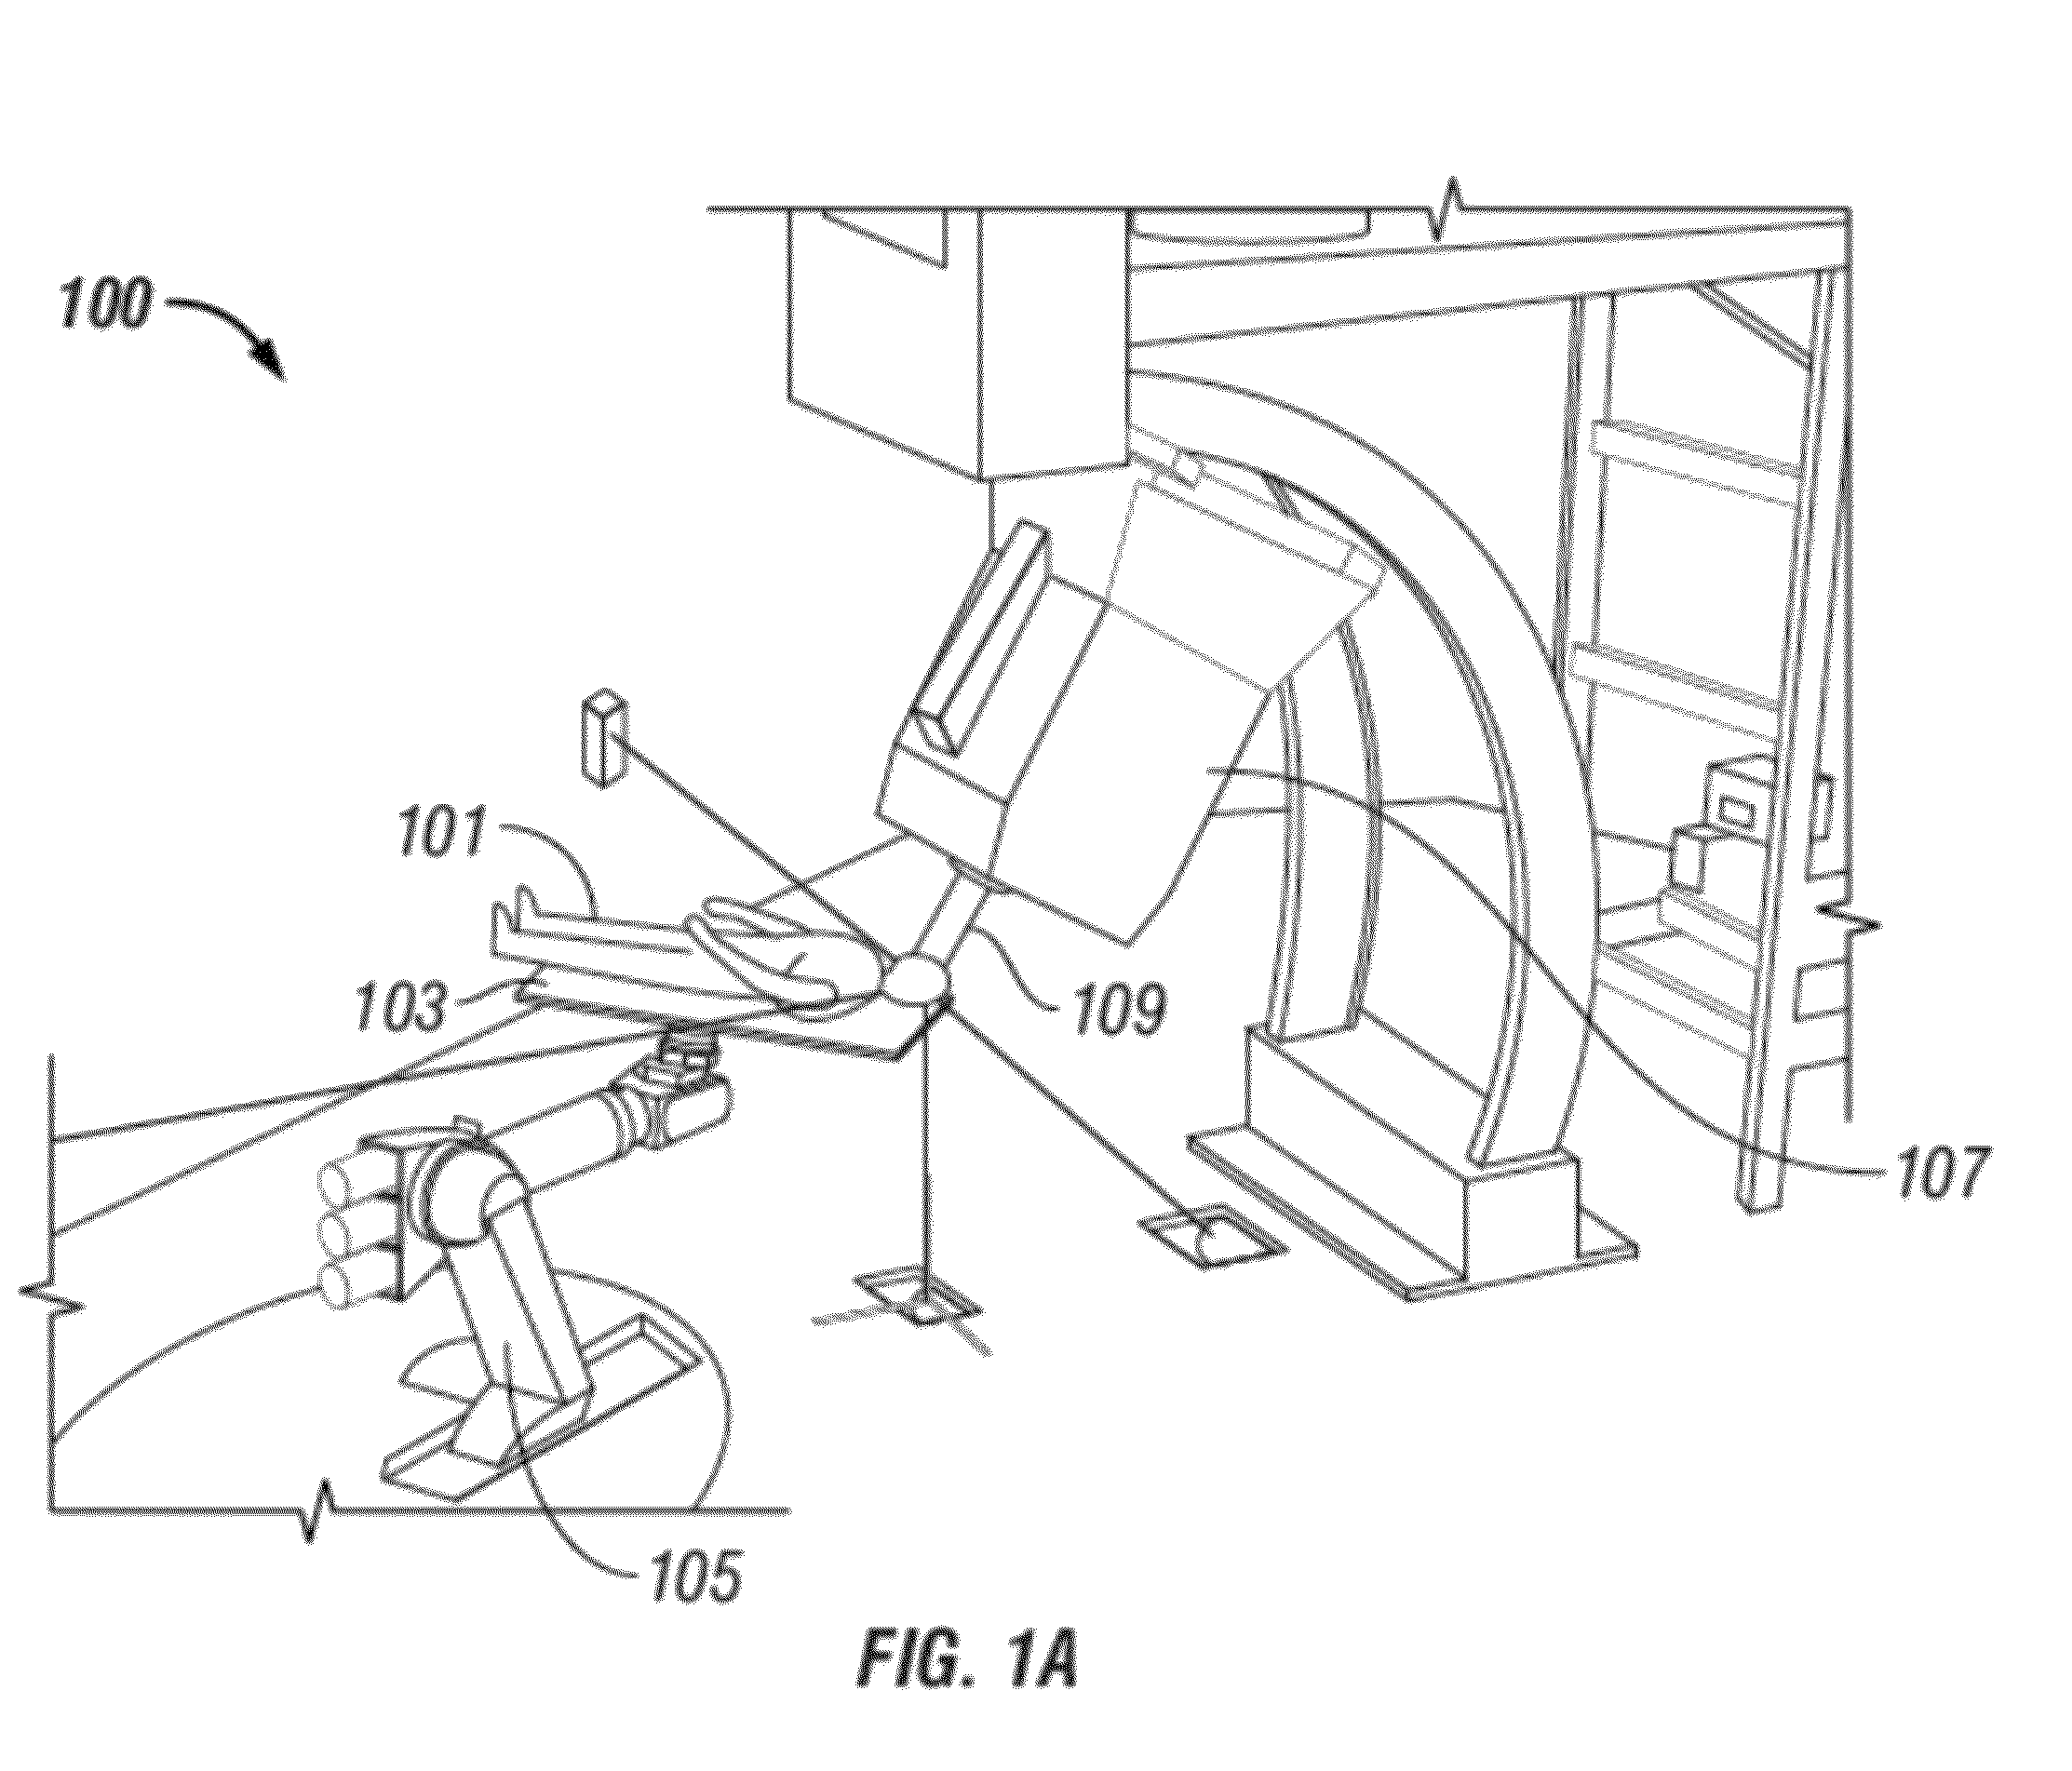 System and method for radiation therapy imaging and treatment workflow scheduling and optimization